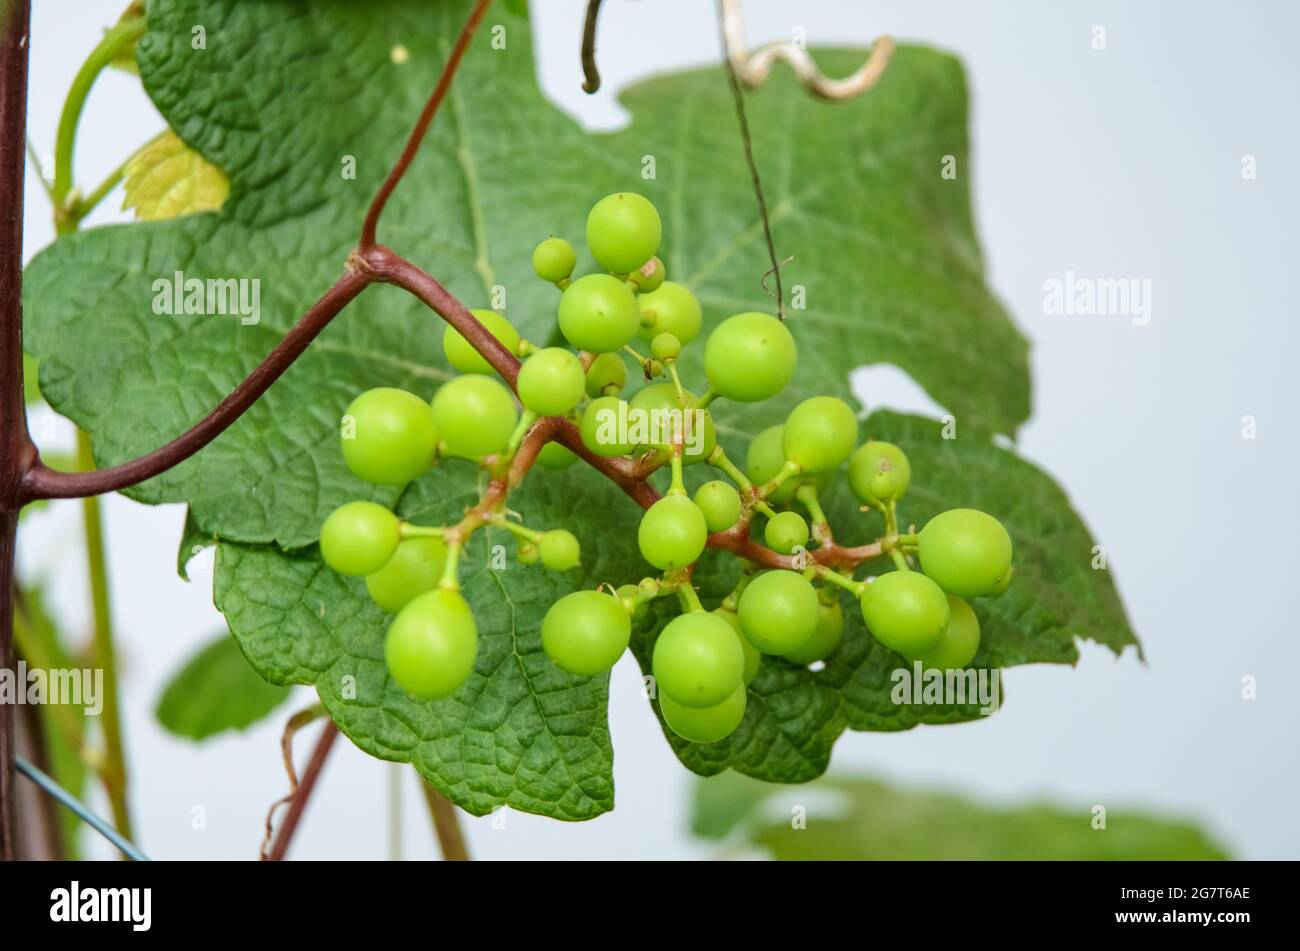 Vitis vinifera, young green common grape vine leaves, grapevine plant with berries in the garden Stock Photo